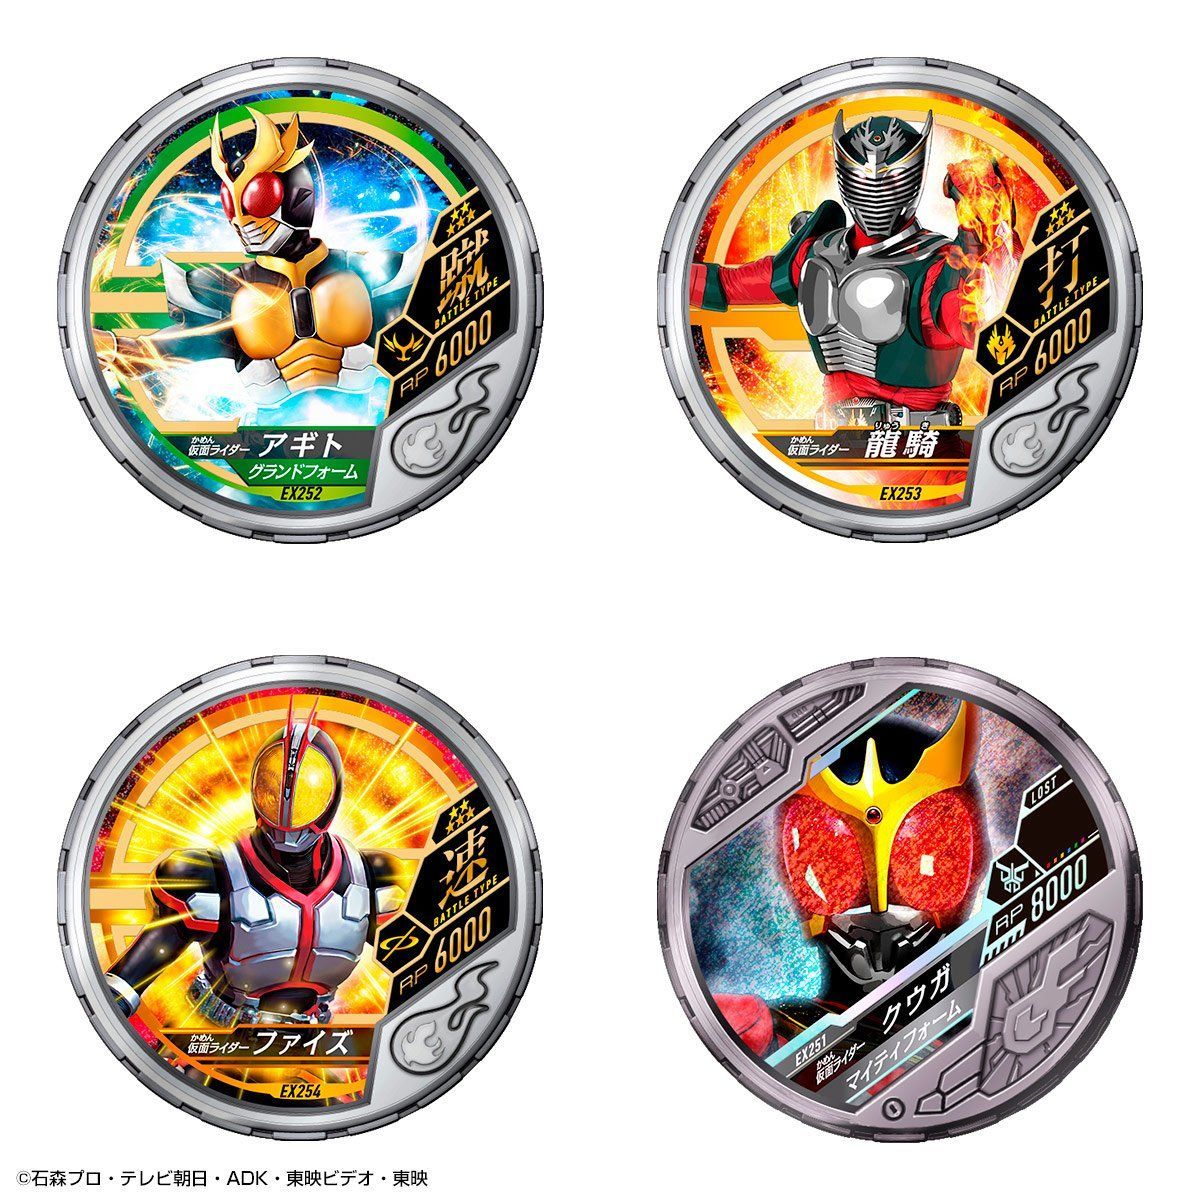 Time Chronicle 20th Anniversary Buttobasoul Medal Holder Set